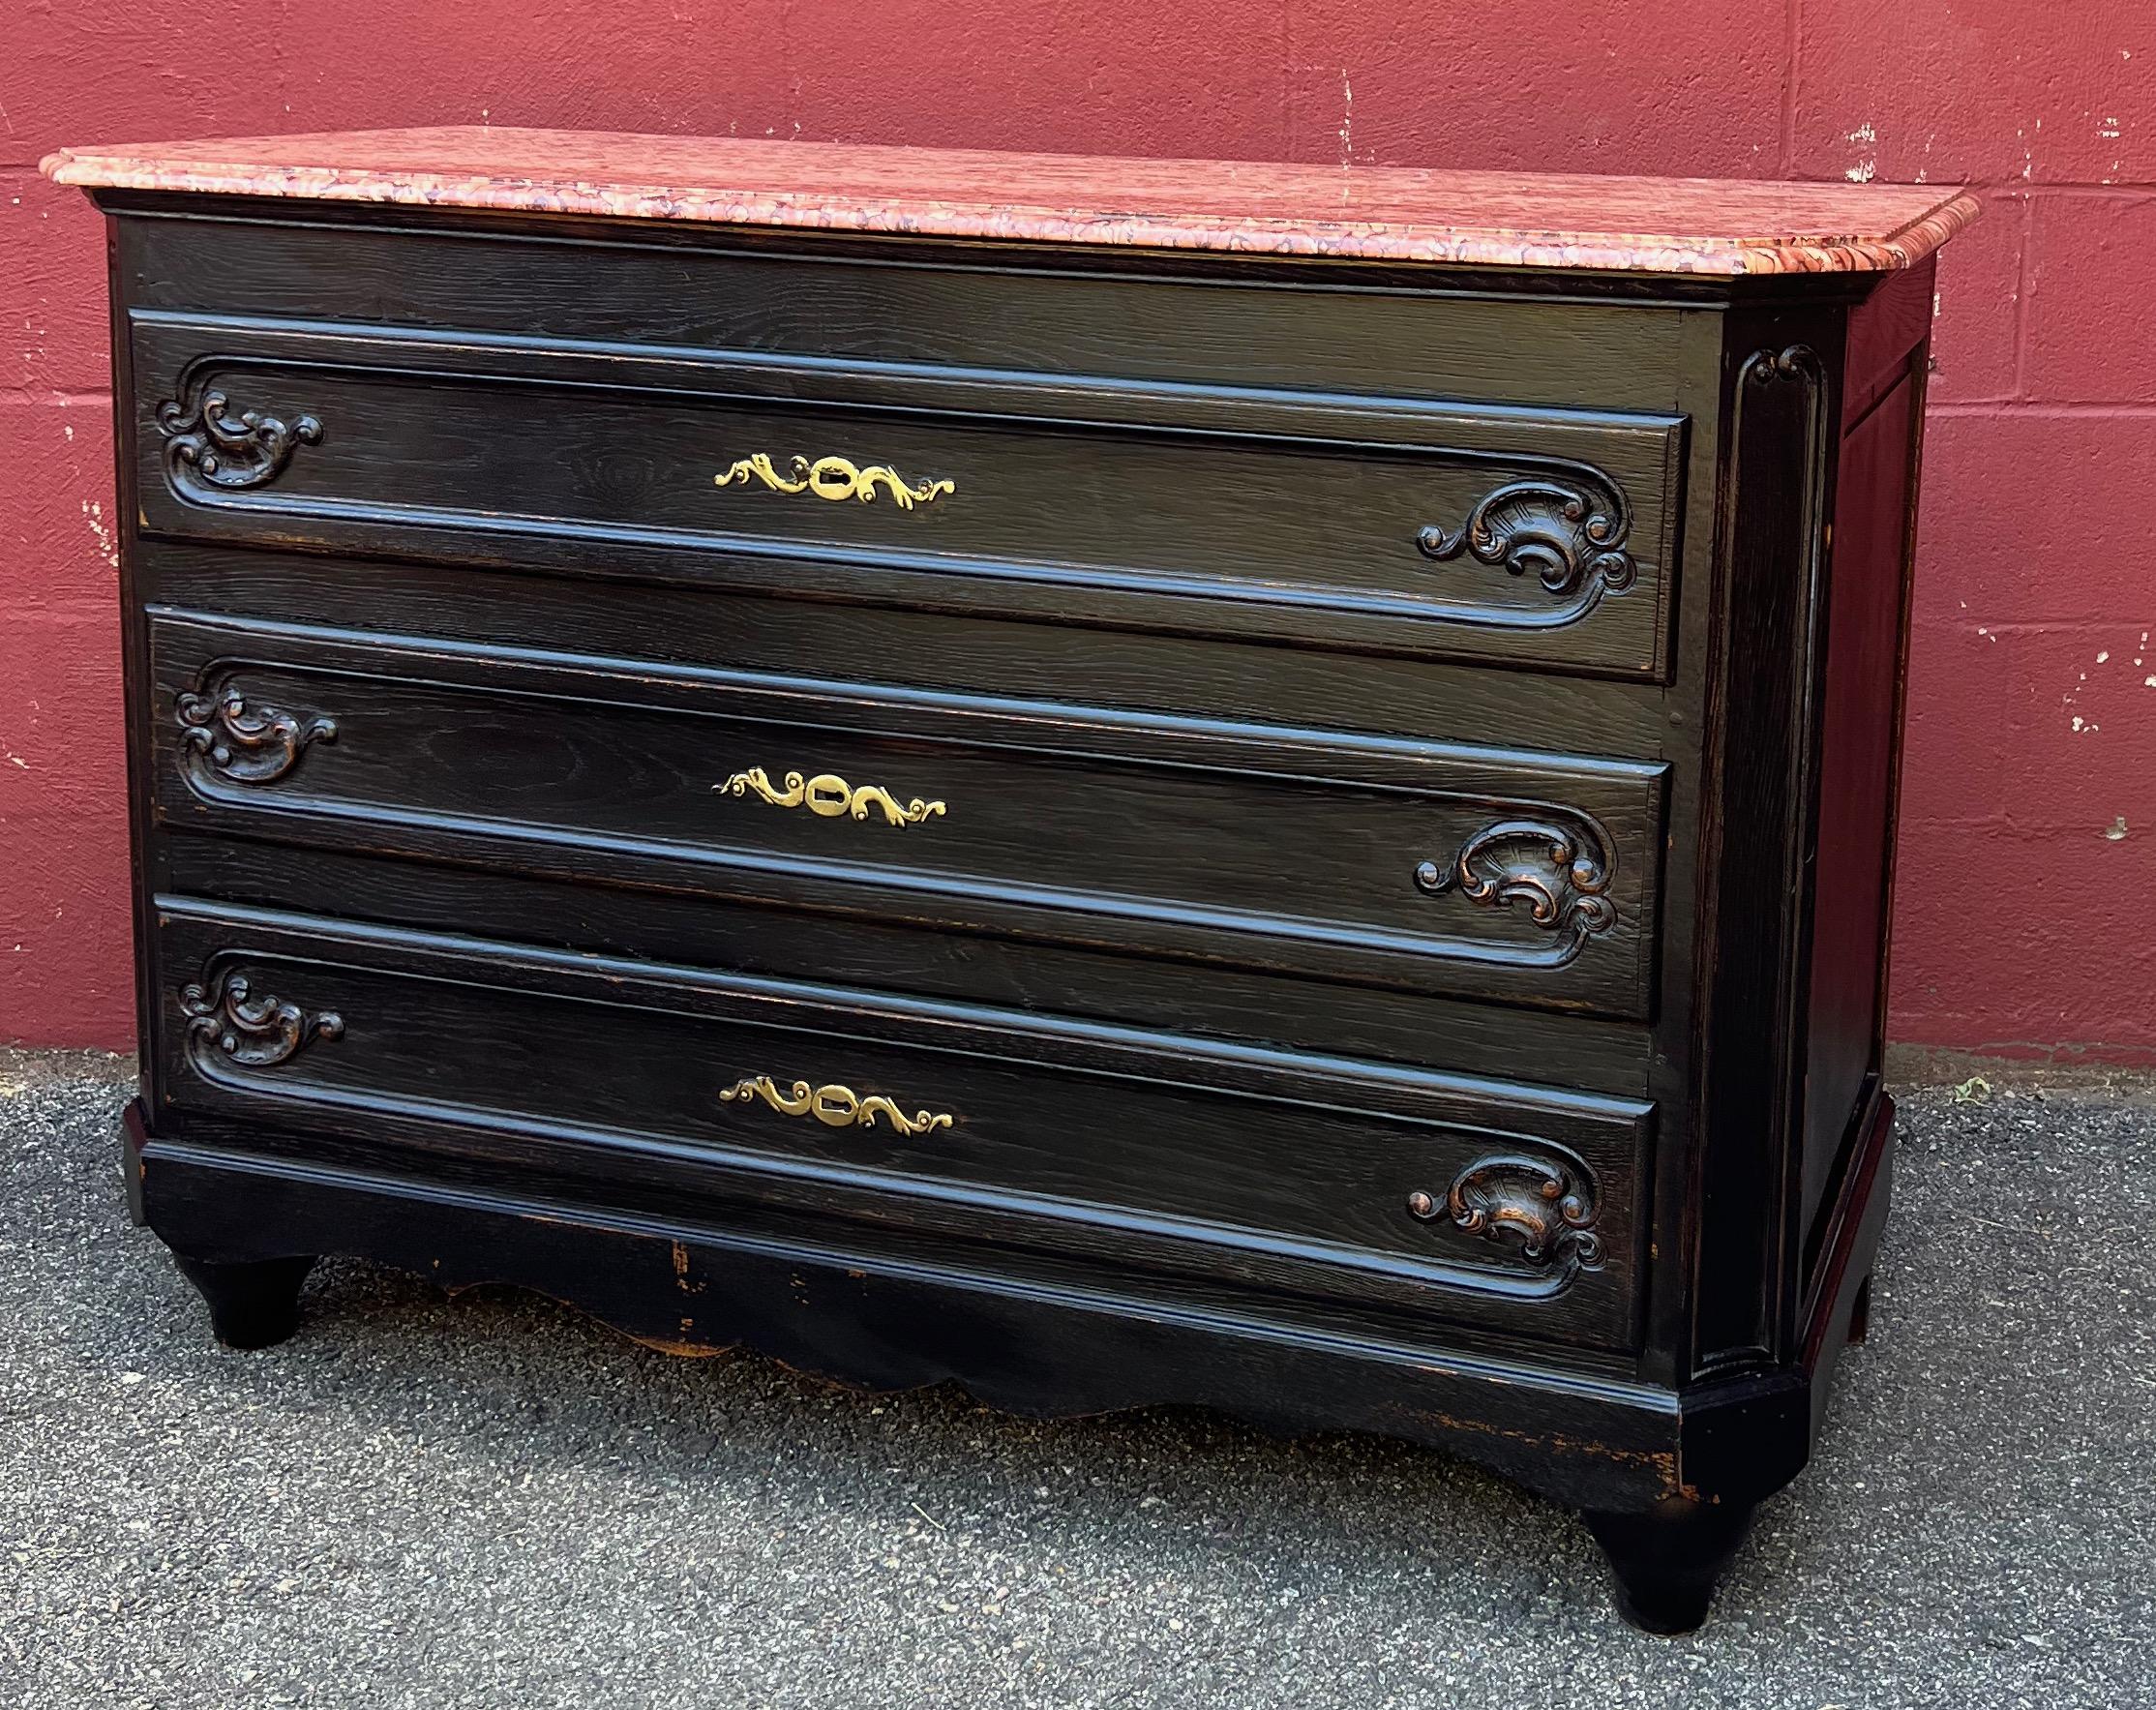 An elegant French 20th century chest of drawers with original brass details and a beautifully veined reddish marble top. The chest of drawers has been painted black but the patina gives this piece an updated “distressed” look. With dimensions of 36